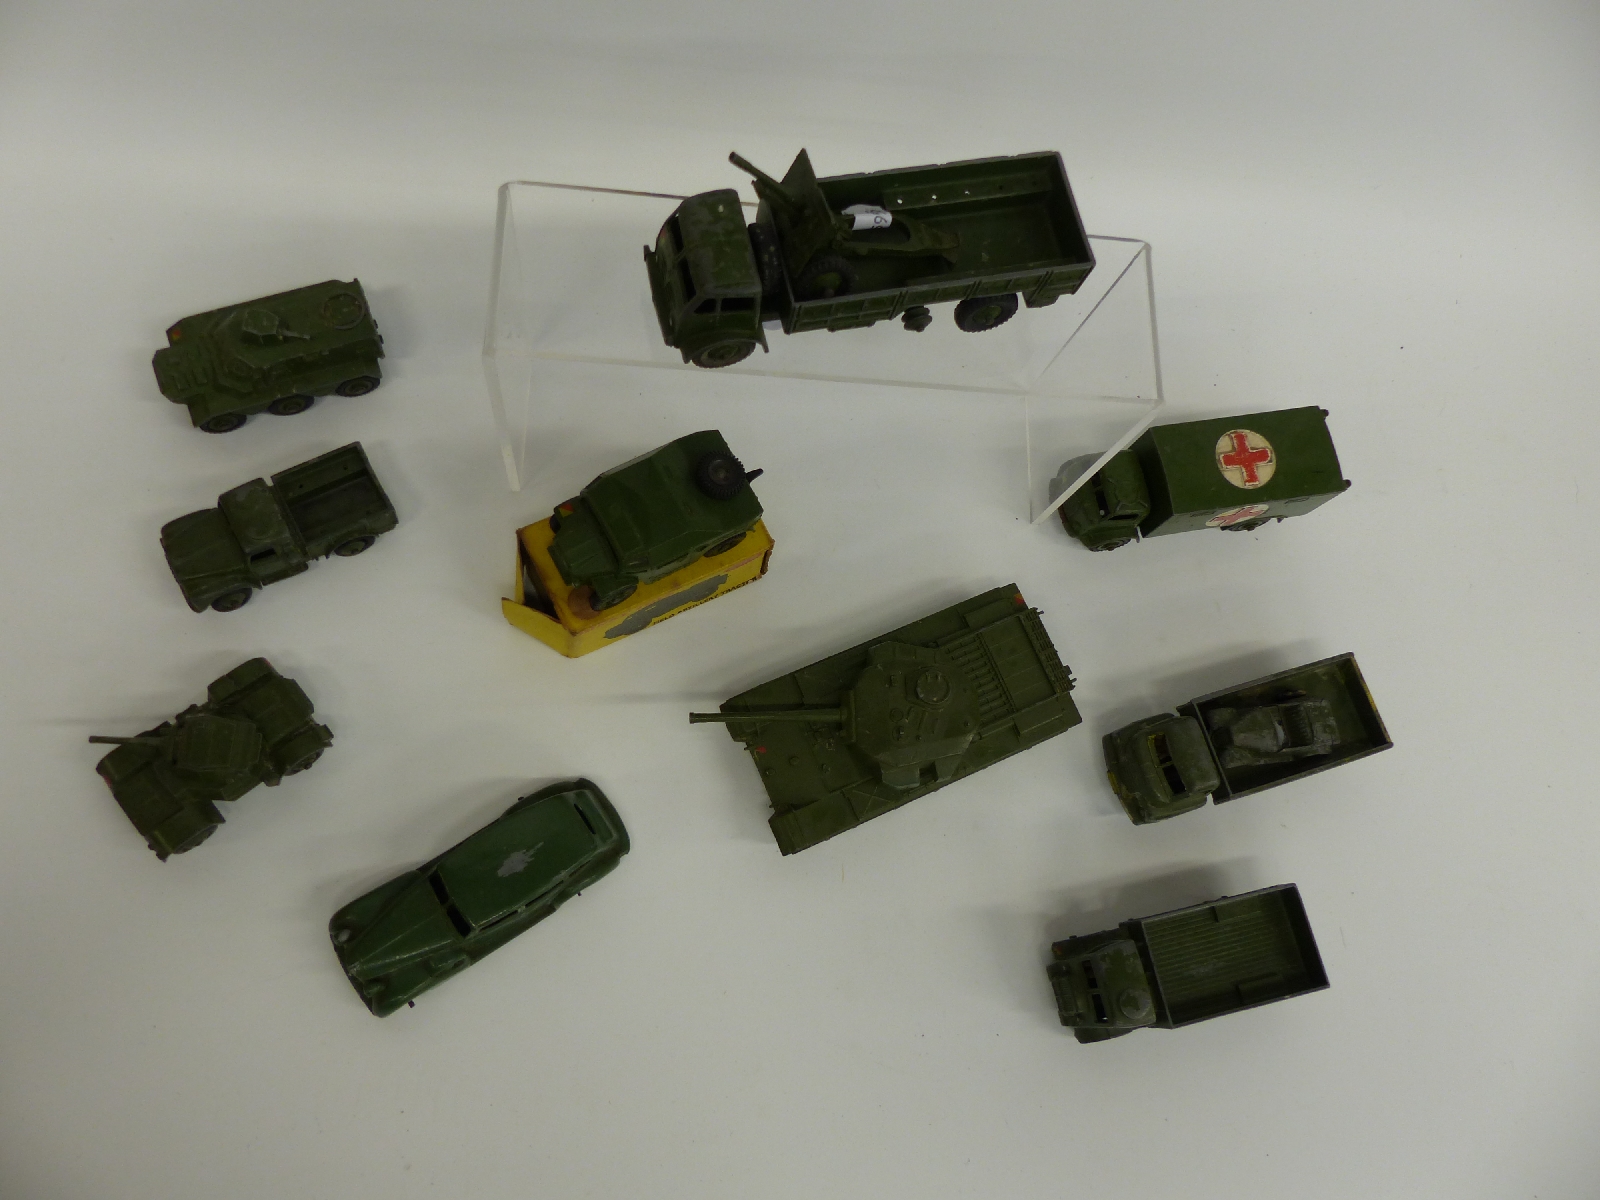 Twelve Dinky Toys and Supertoys diecast model military vehicles including 10-ton Army Truck, - Image 2 of 2